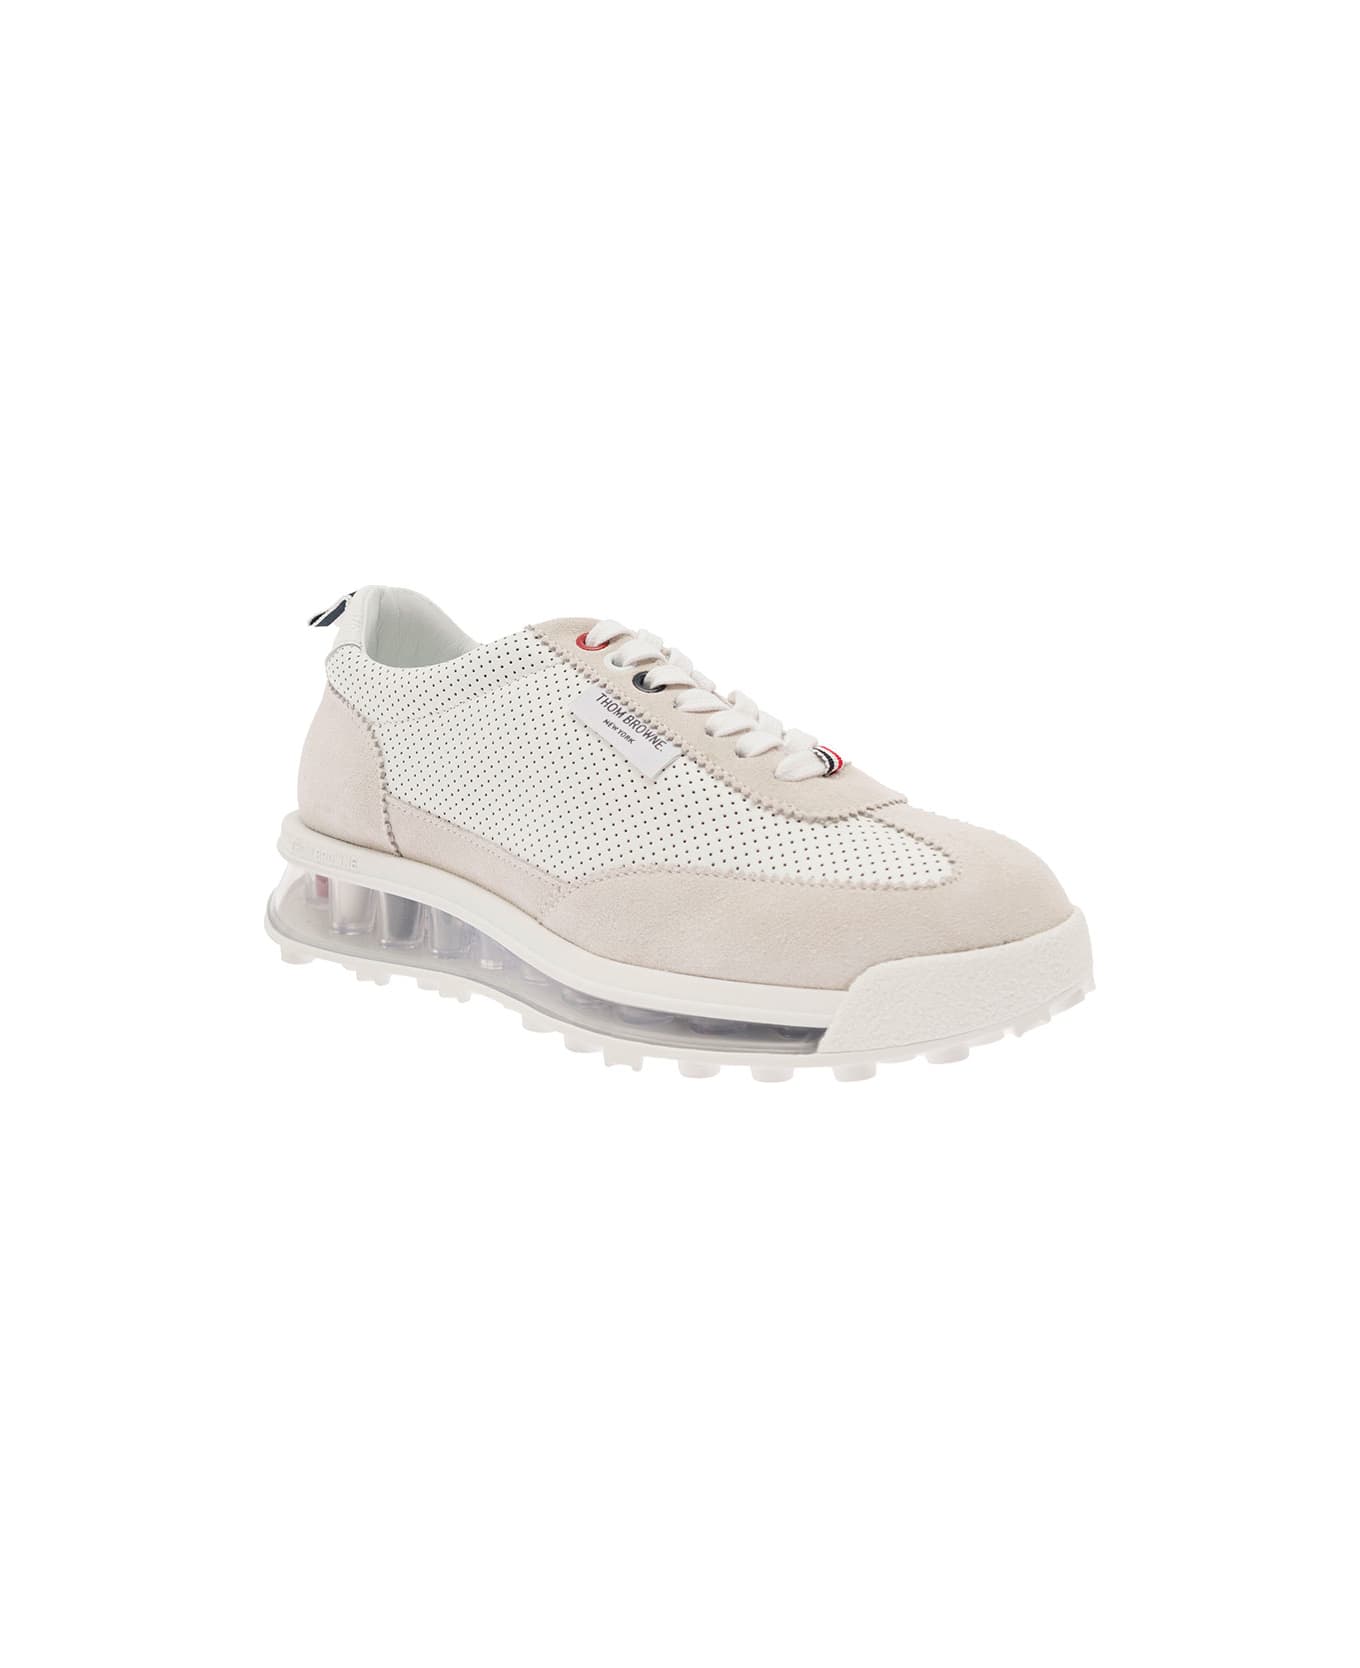 Thom Browne Low Top Tech Sneakers In White Leather Woman - White